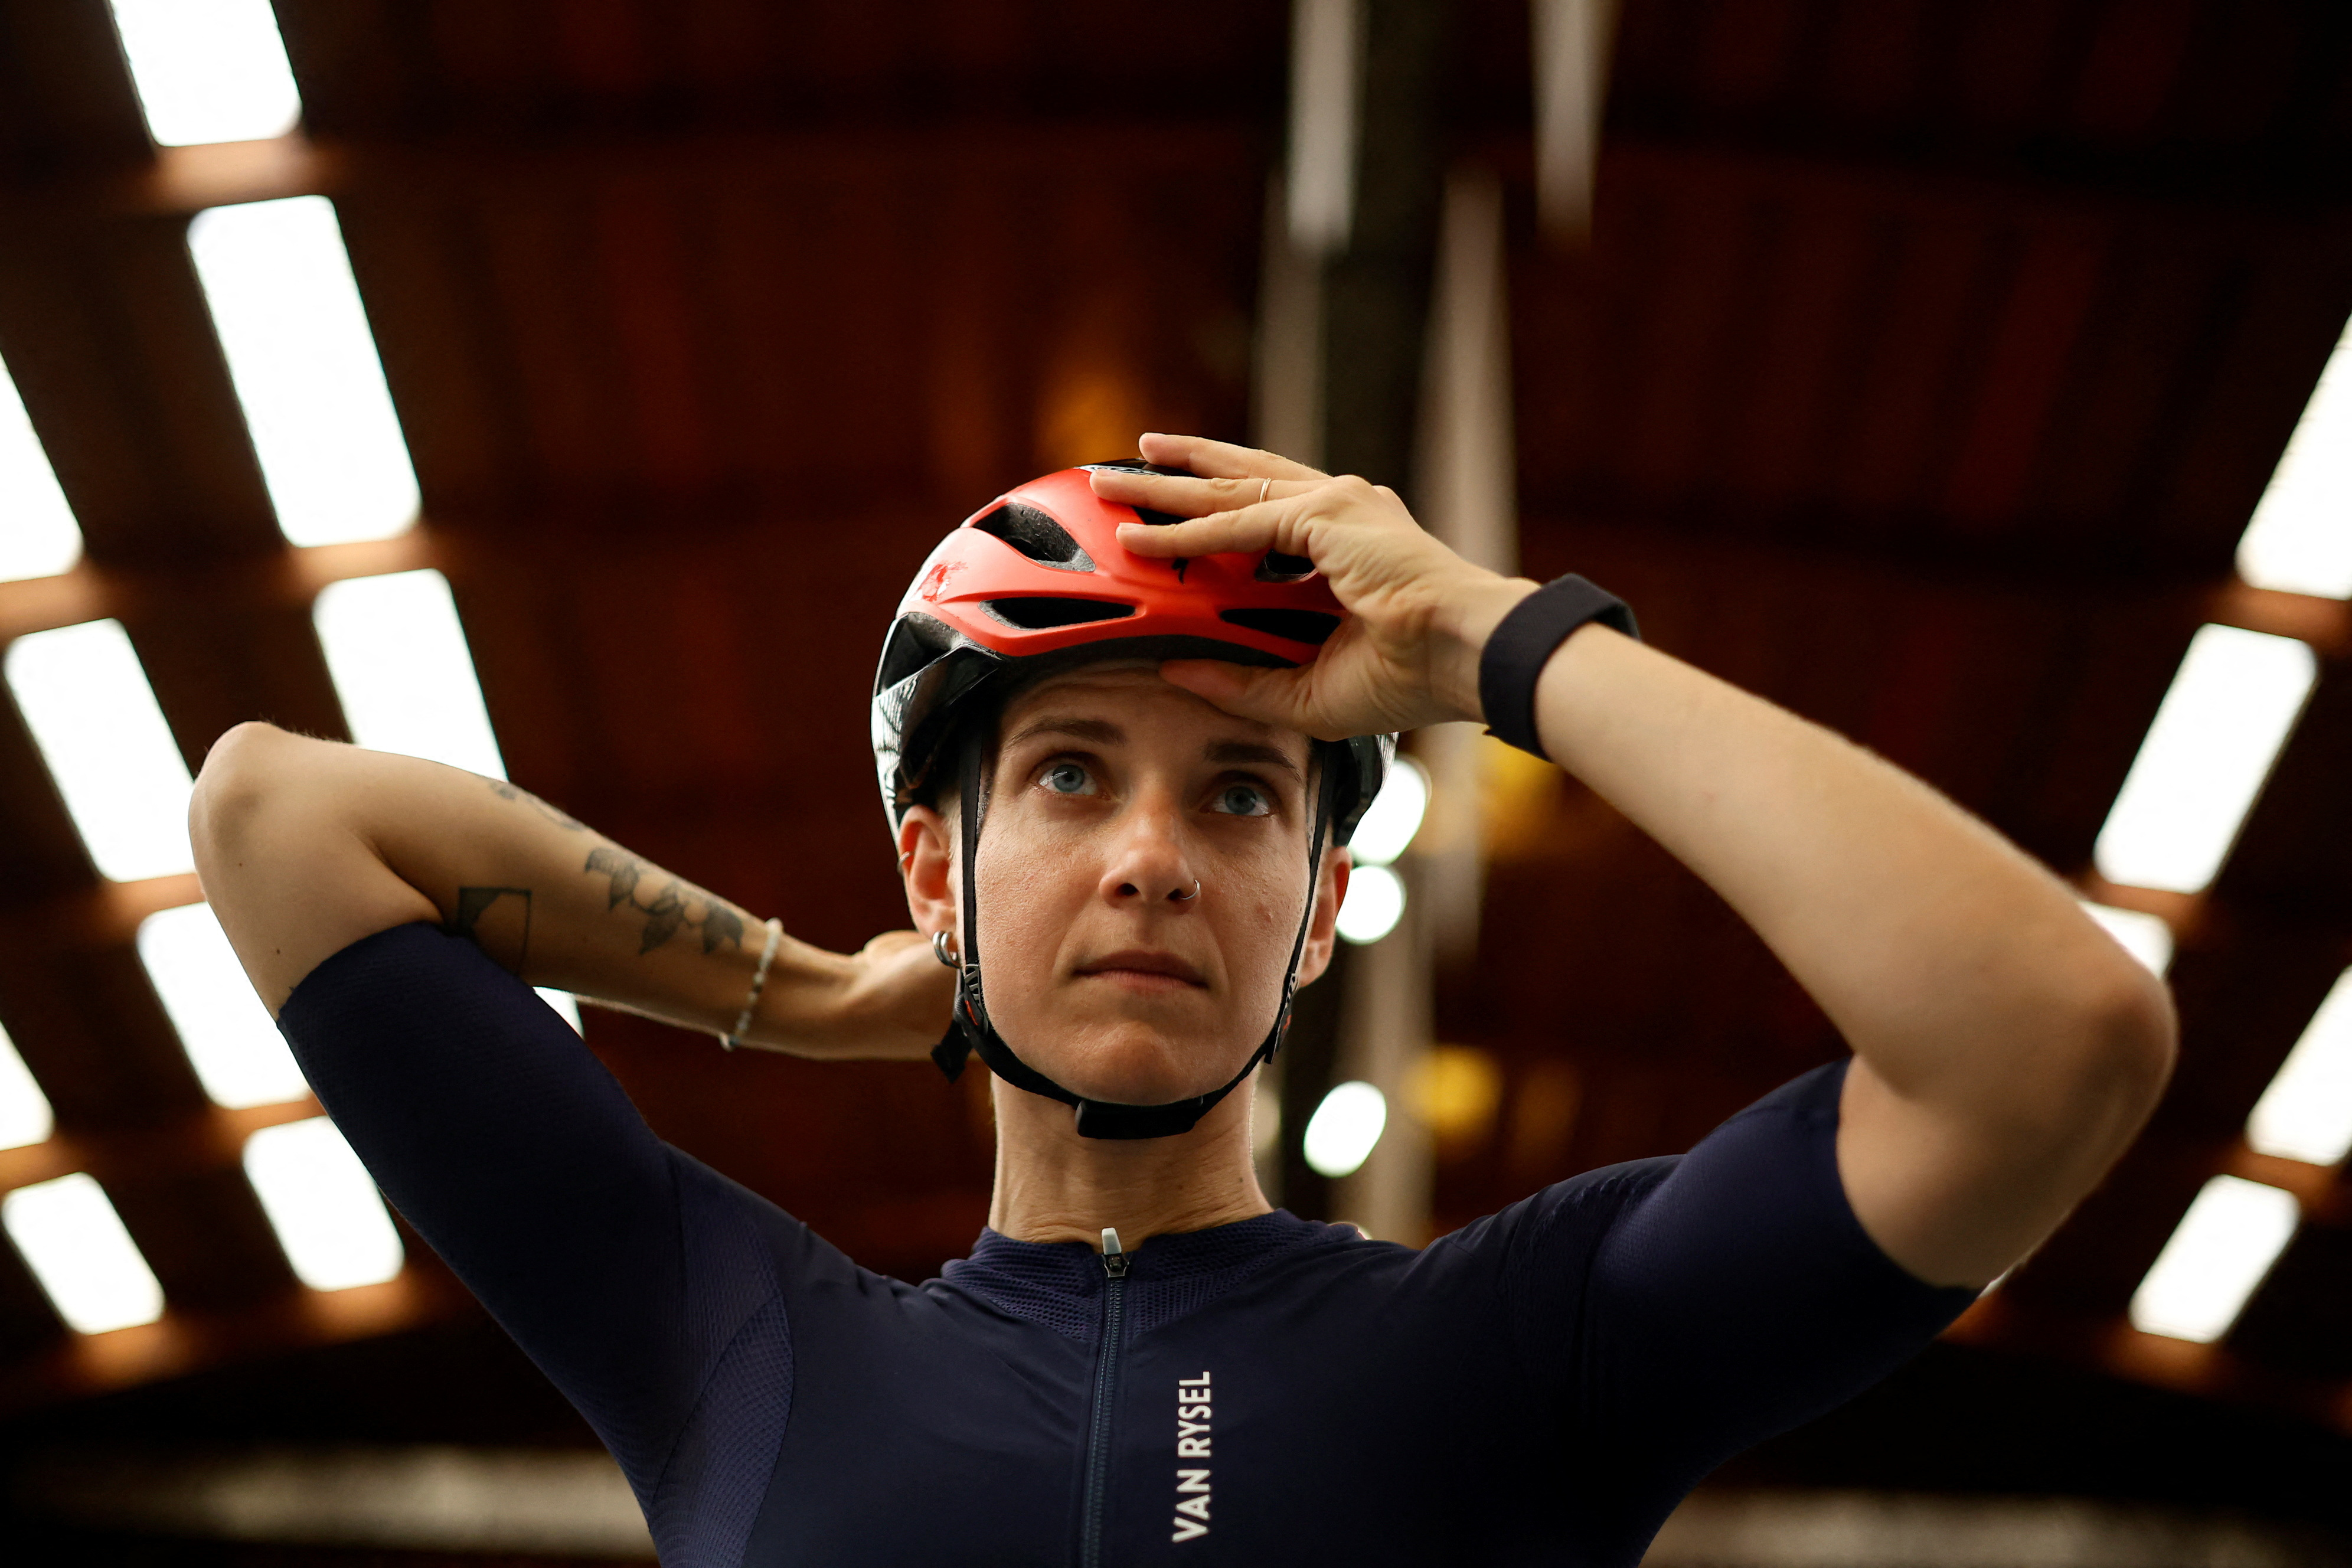 Paralympics-World champion Marie Patouillet hopes for more LGBTQIA+ acceptance in cycling